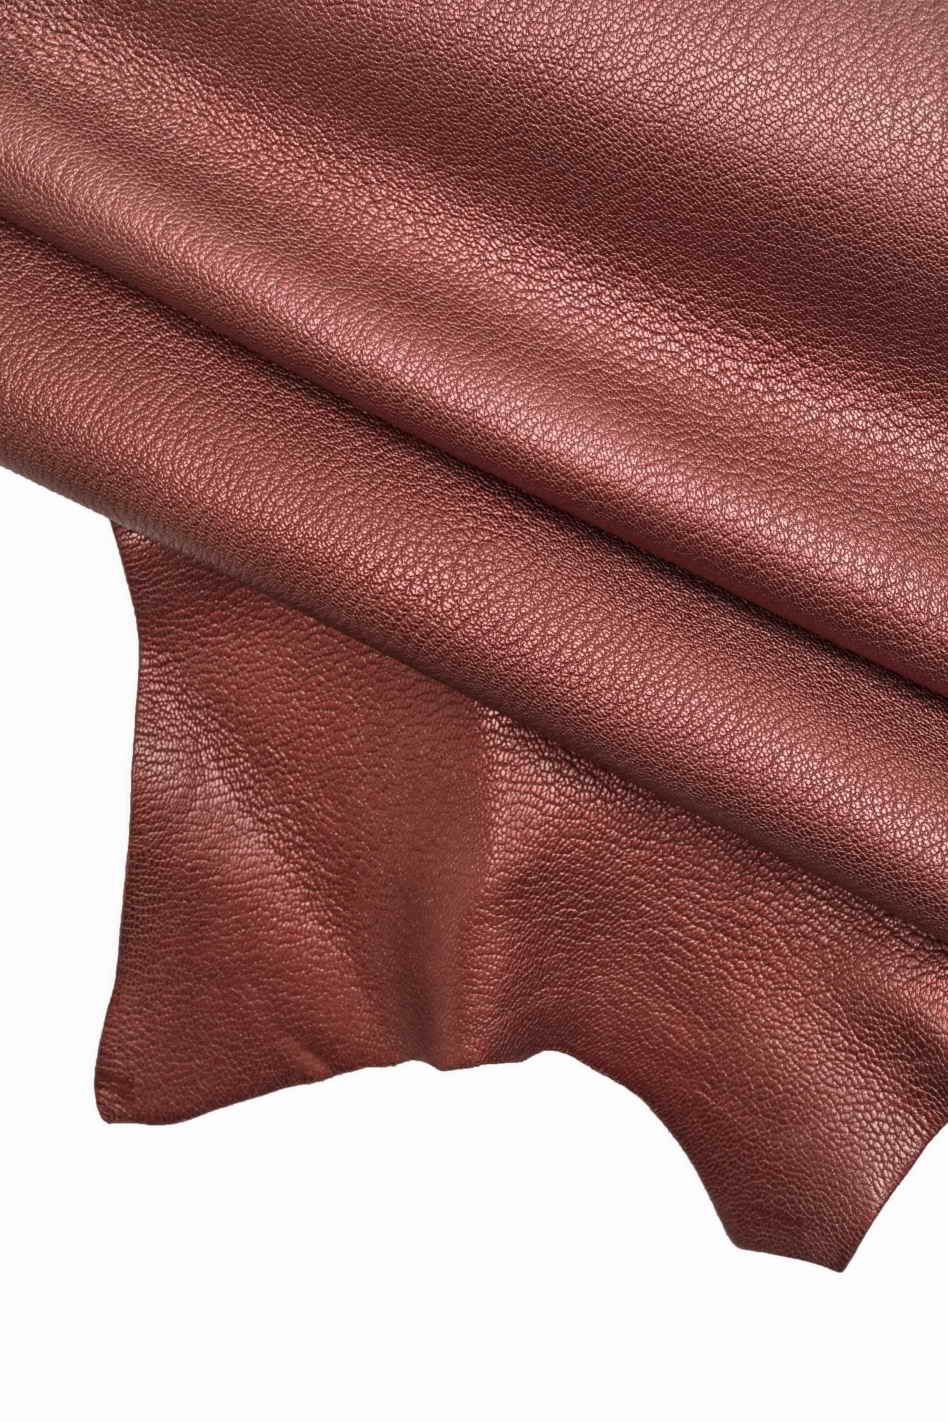 LEATHER 12x12 Natural LEATHER, Leather Sheet, Leather Skins